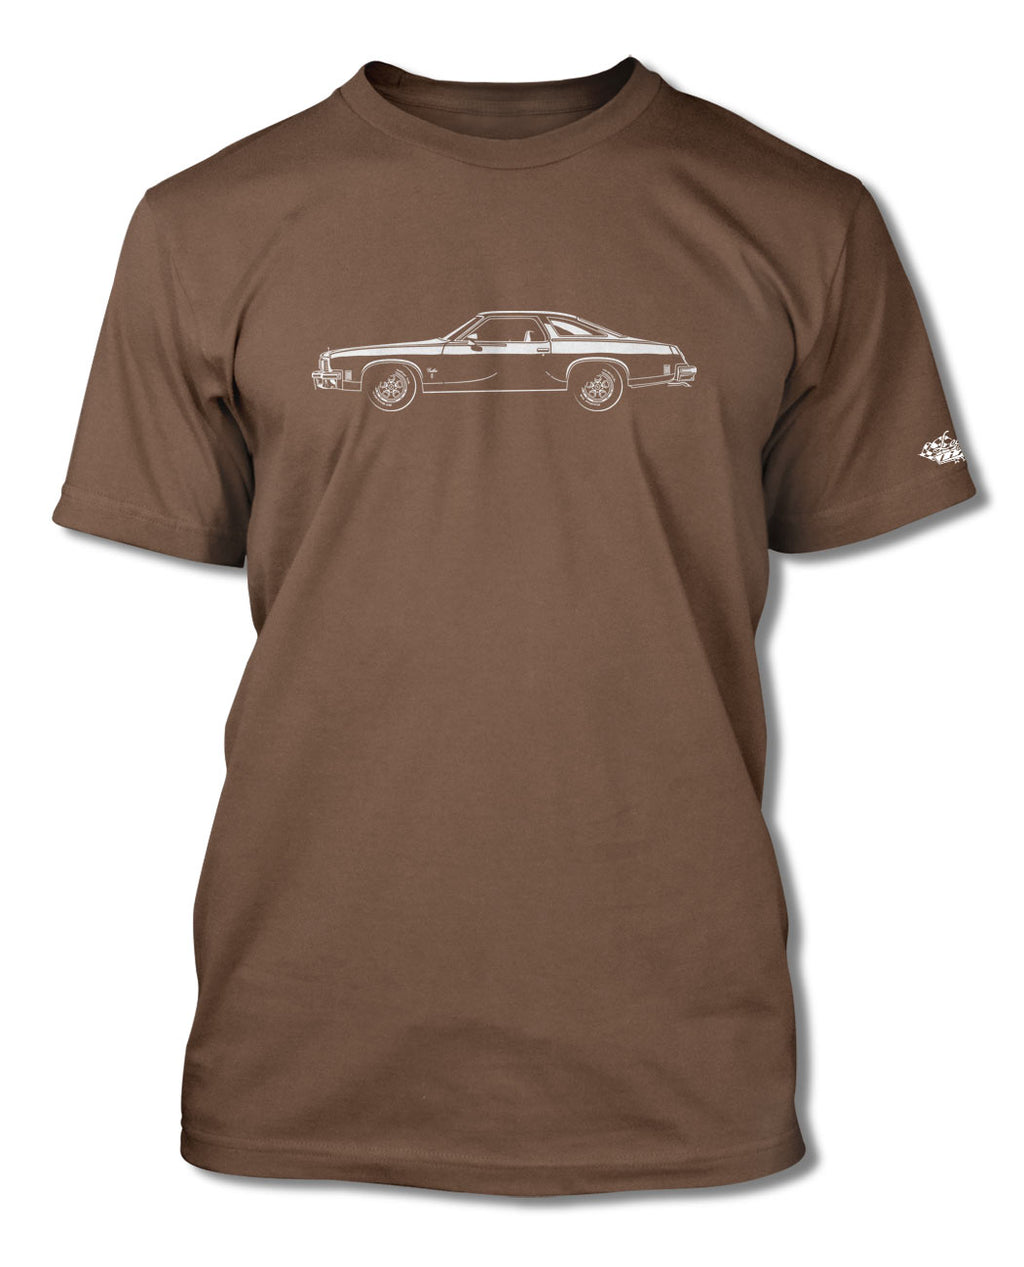 1975 Oldsmobile Cutlass S Coupe T-Shirt - Men - Side View